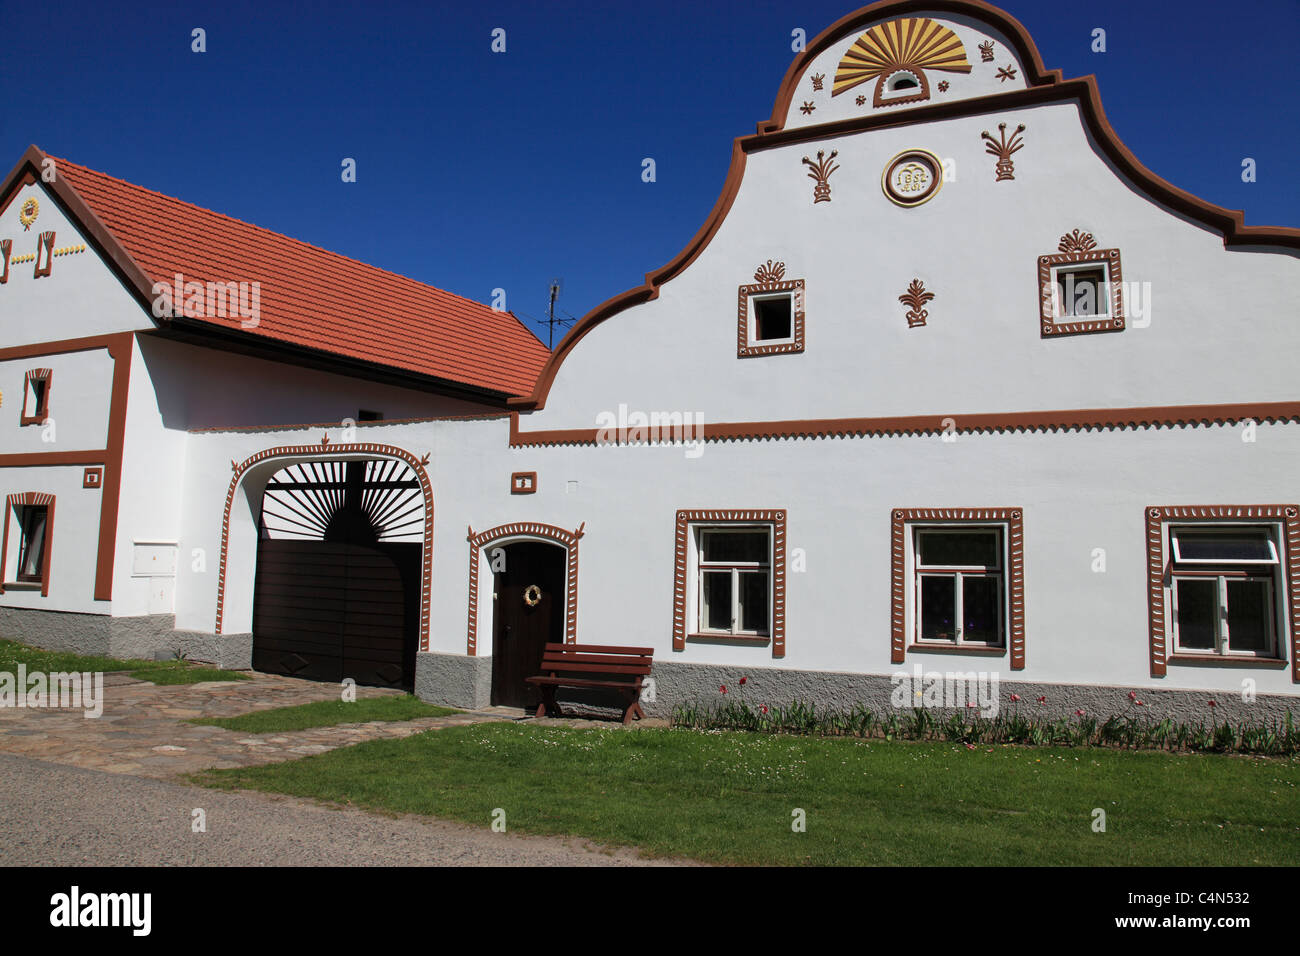 facade of houses at historical village of Holasovice Ceske Budejovice Czech Republic, Europe. Photo by Willy Matheisl Stock Photo